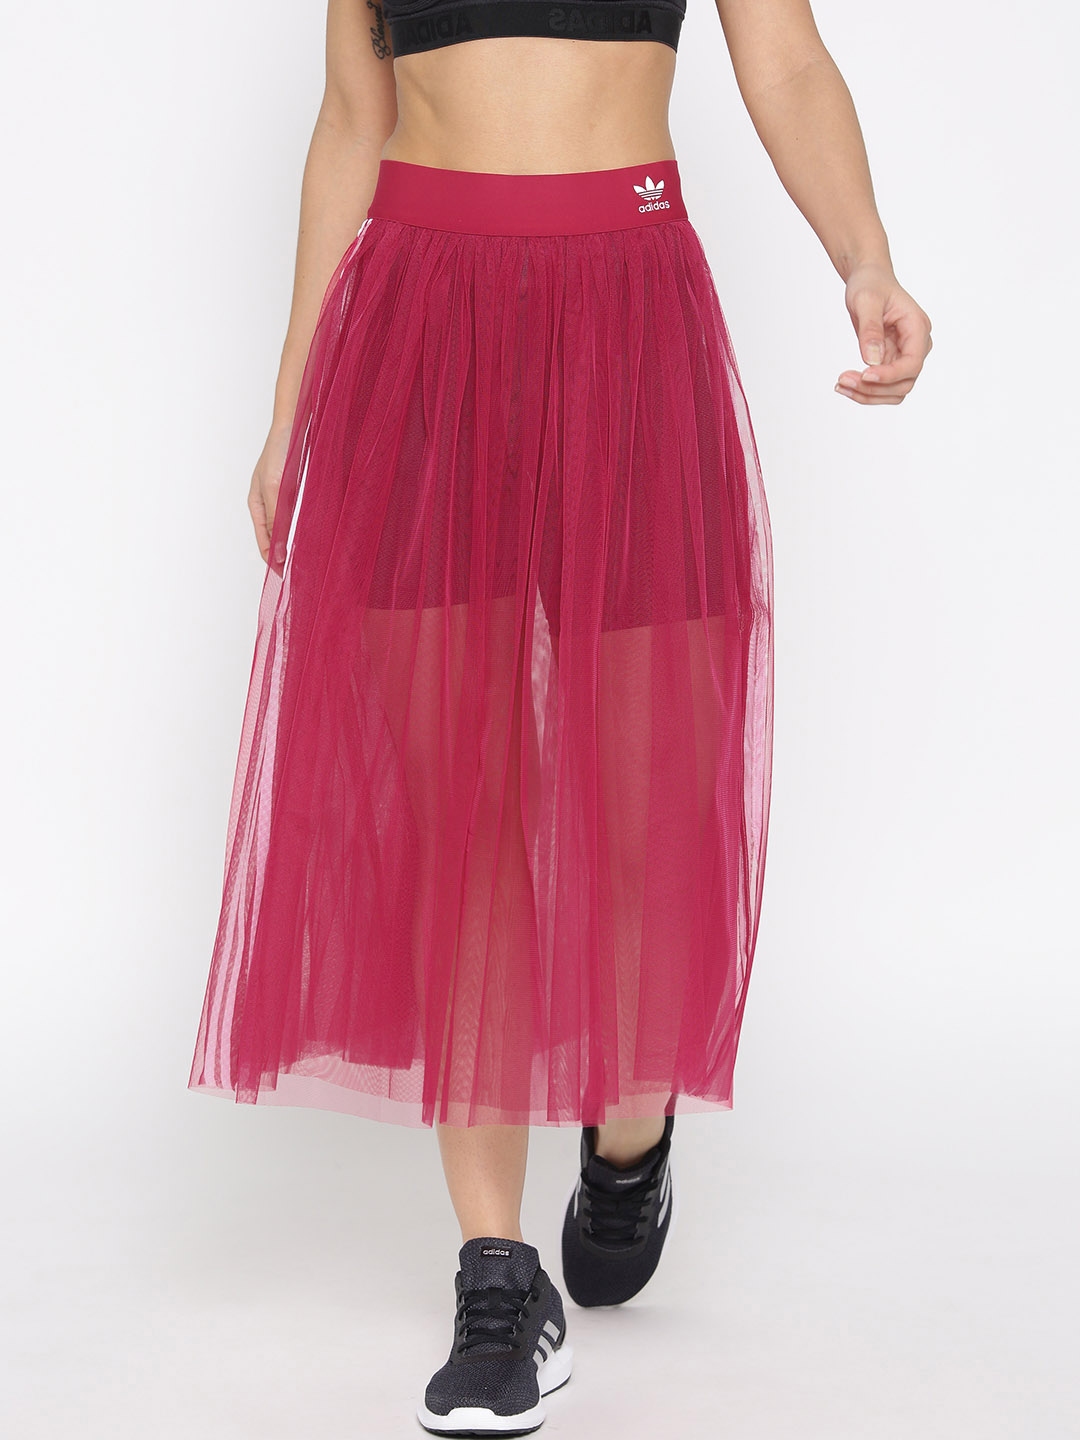 Buy ADIDAS Solid Tulle Sheer Skirt - Skirts for Women 8810675 | Myntra